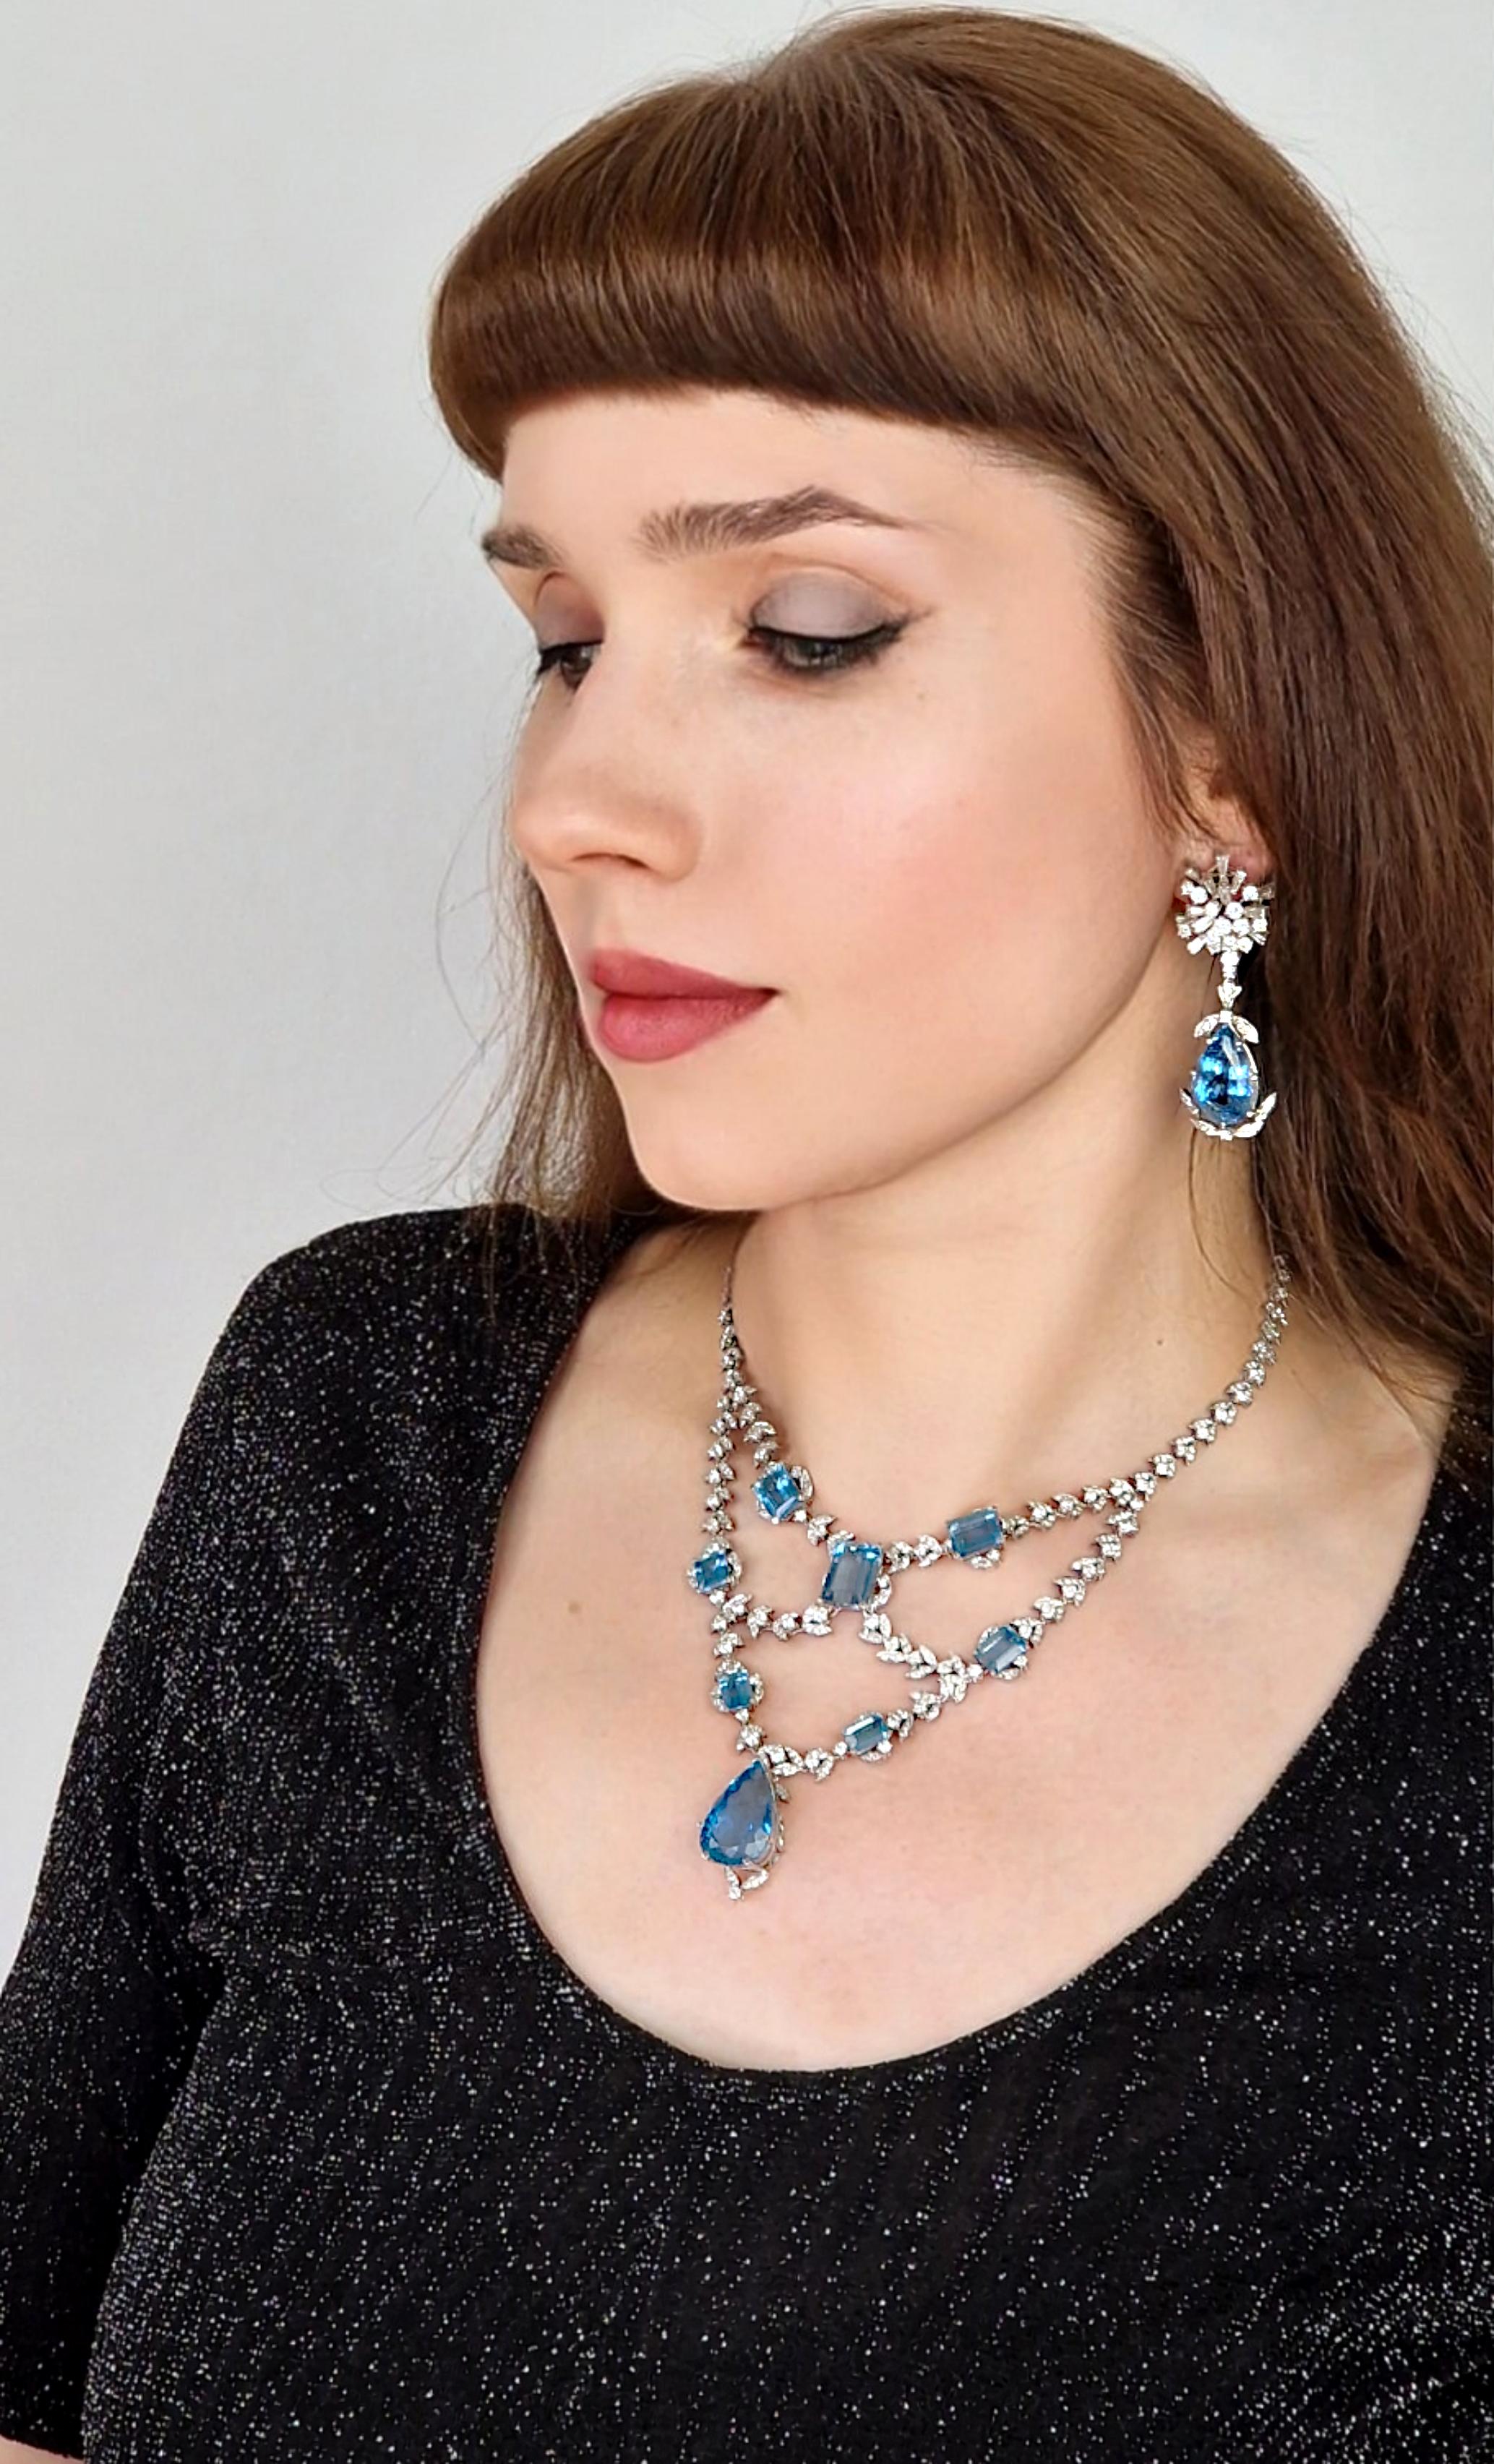 A classic and absolutely stunning piece, this is a one-of-a-kind necklace features immaculately matched dark blue emerald cut aquamarines mounted on delicate swallow wing motifs set with fine white brilliant diamonds.  

This stunning necklace